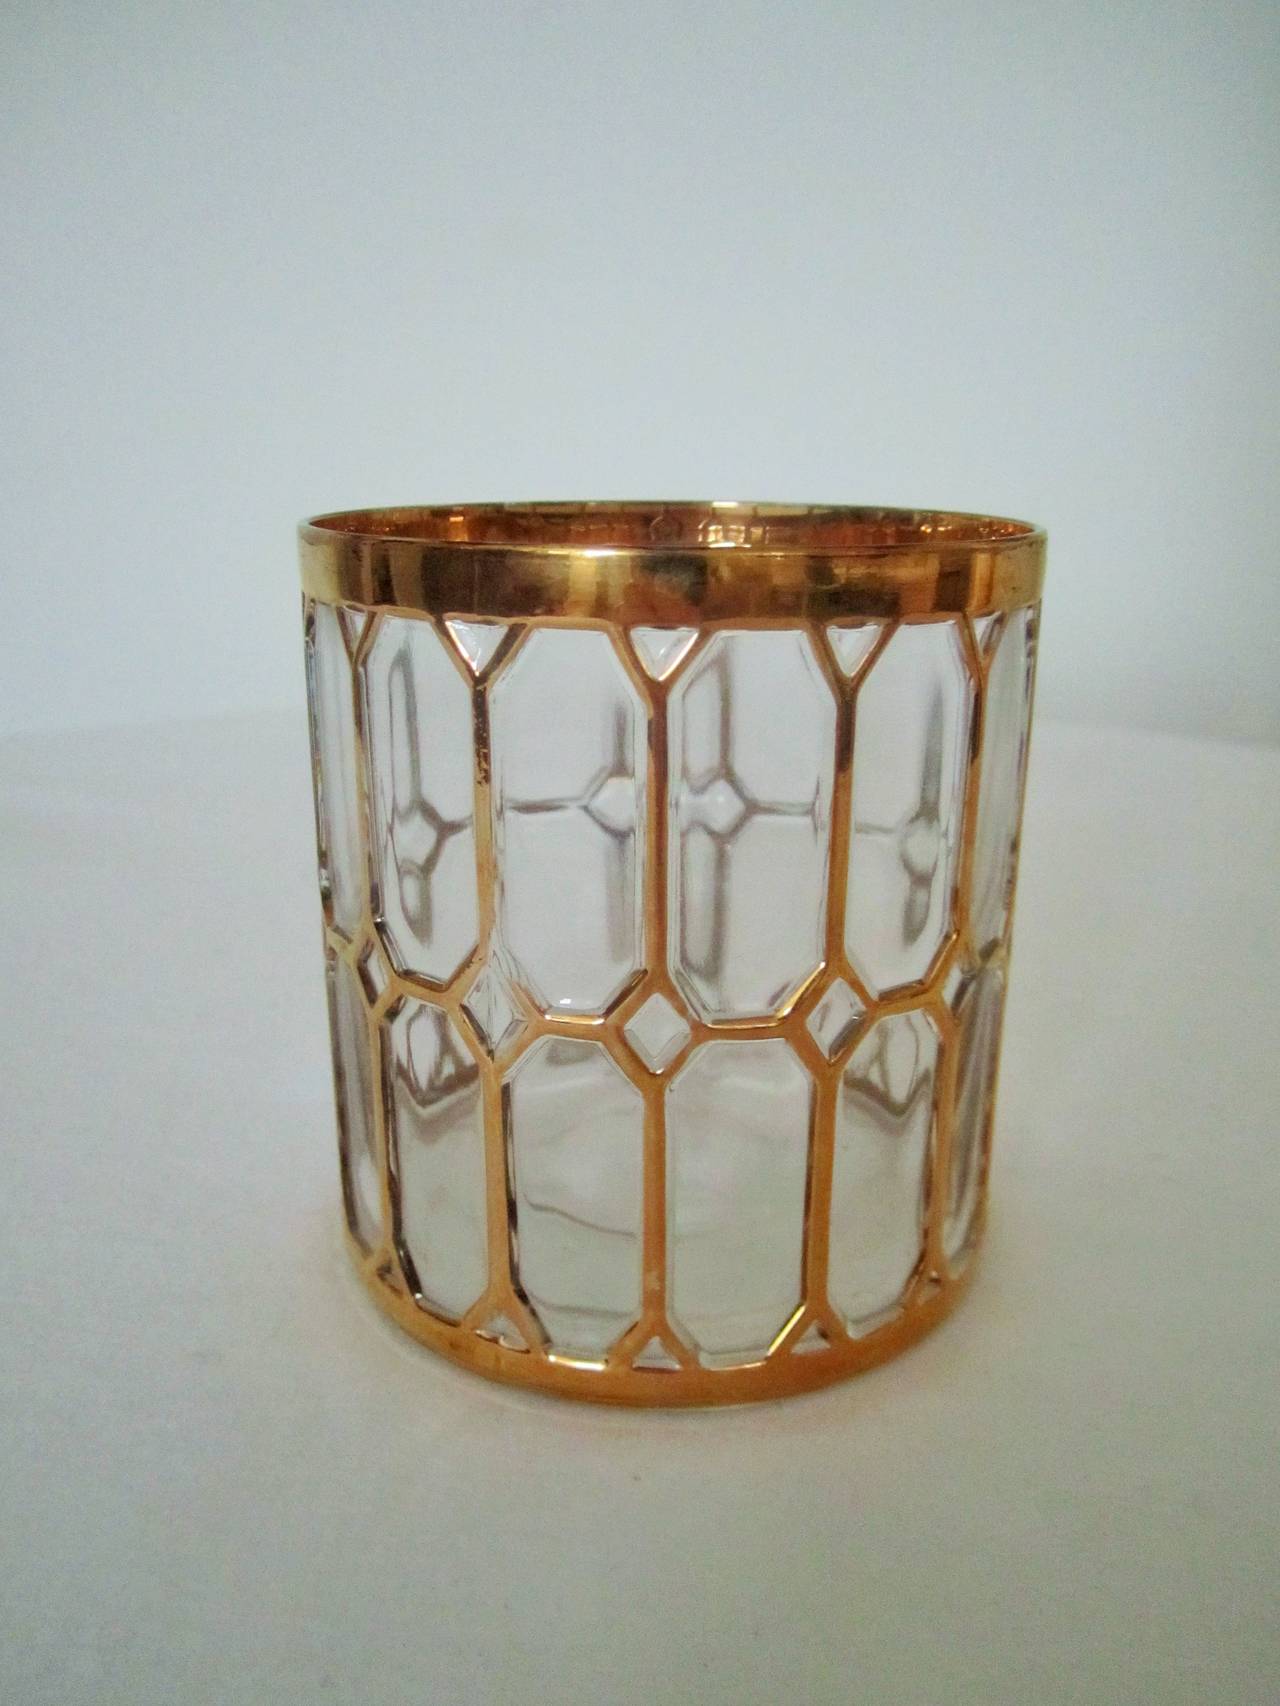 American Vintage Barware Rocks Cocktail Glasses in 24-Karat Gold by Imperial Glass, 1970s